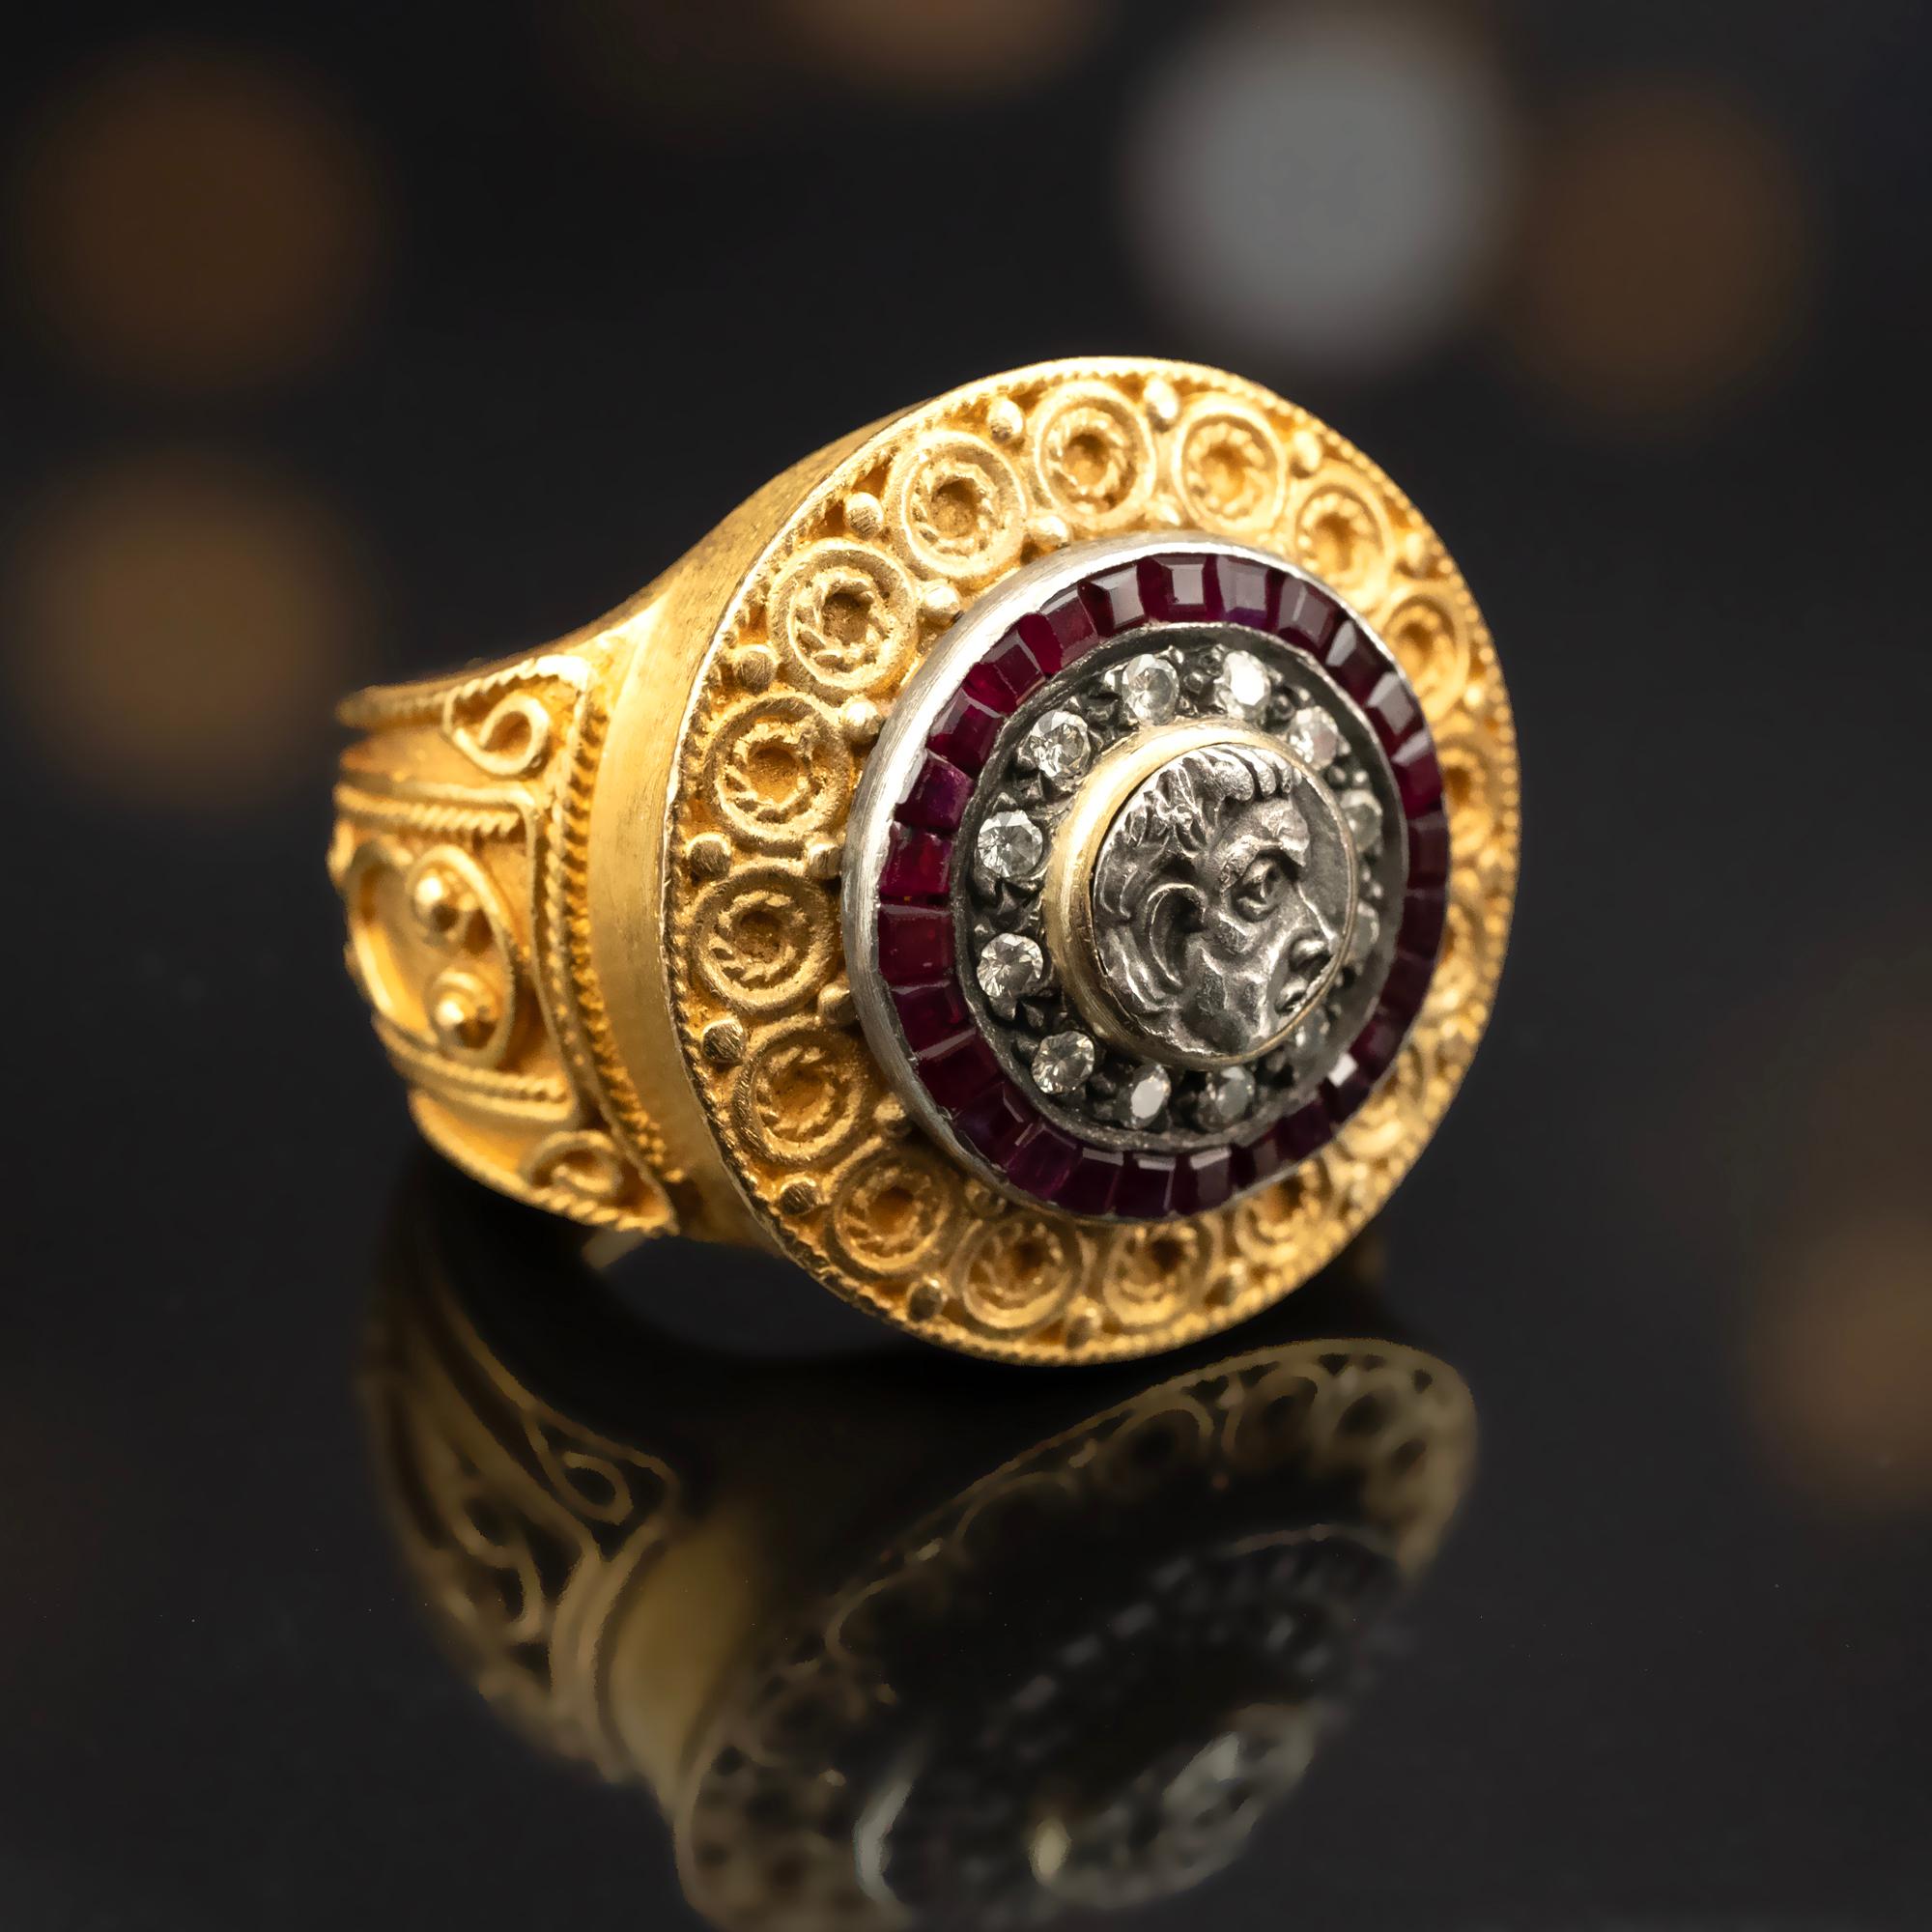 Handmade in rich 22 Karat gold, this Byzantine style ring boasts an impressive weight of 27 grams, lending a substantial feel to your ensemble. A portion of an antique coin, set in silver, takes center stage, encircled by diamonds and then a circle